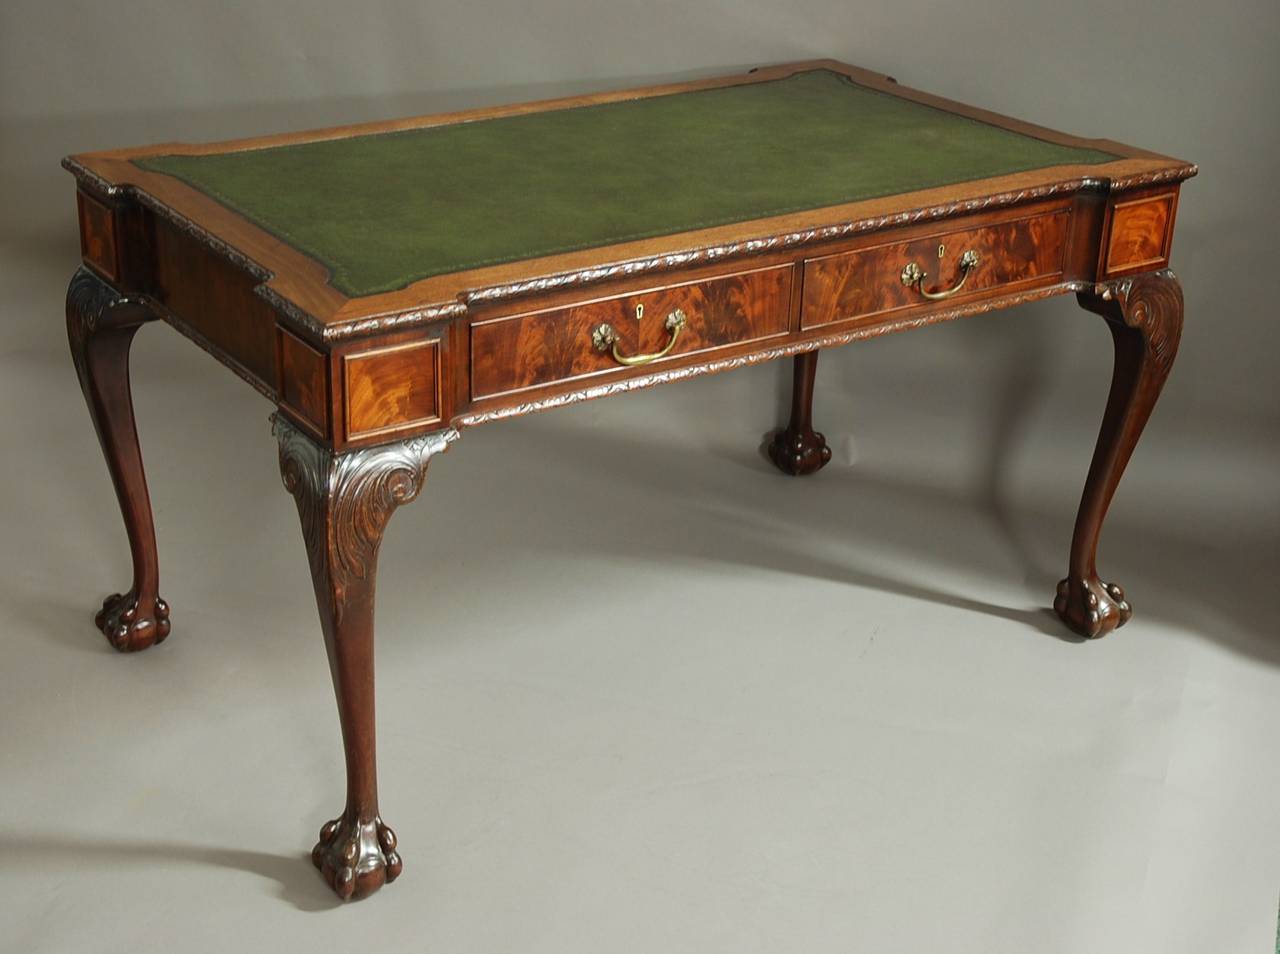 A late 19th century/early 20th century Waring & Gillows mahogany writing table in the Chippendale style.

This table consists of a rectangualr top with re-entrant corners with an inset green tooled leather top, recently replaced, with a carved